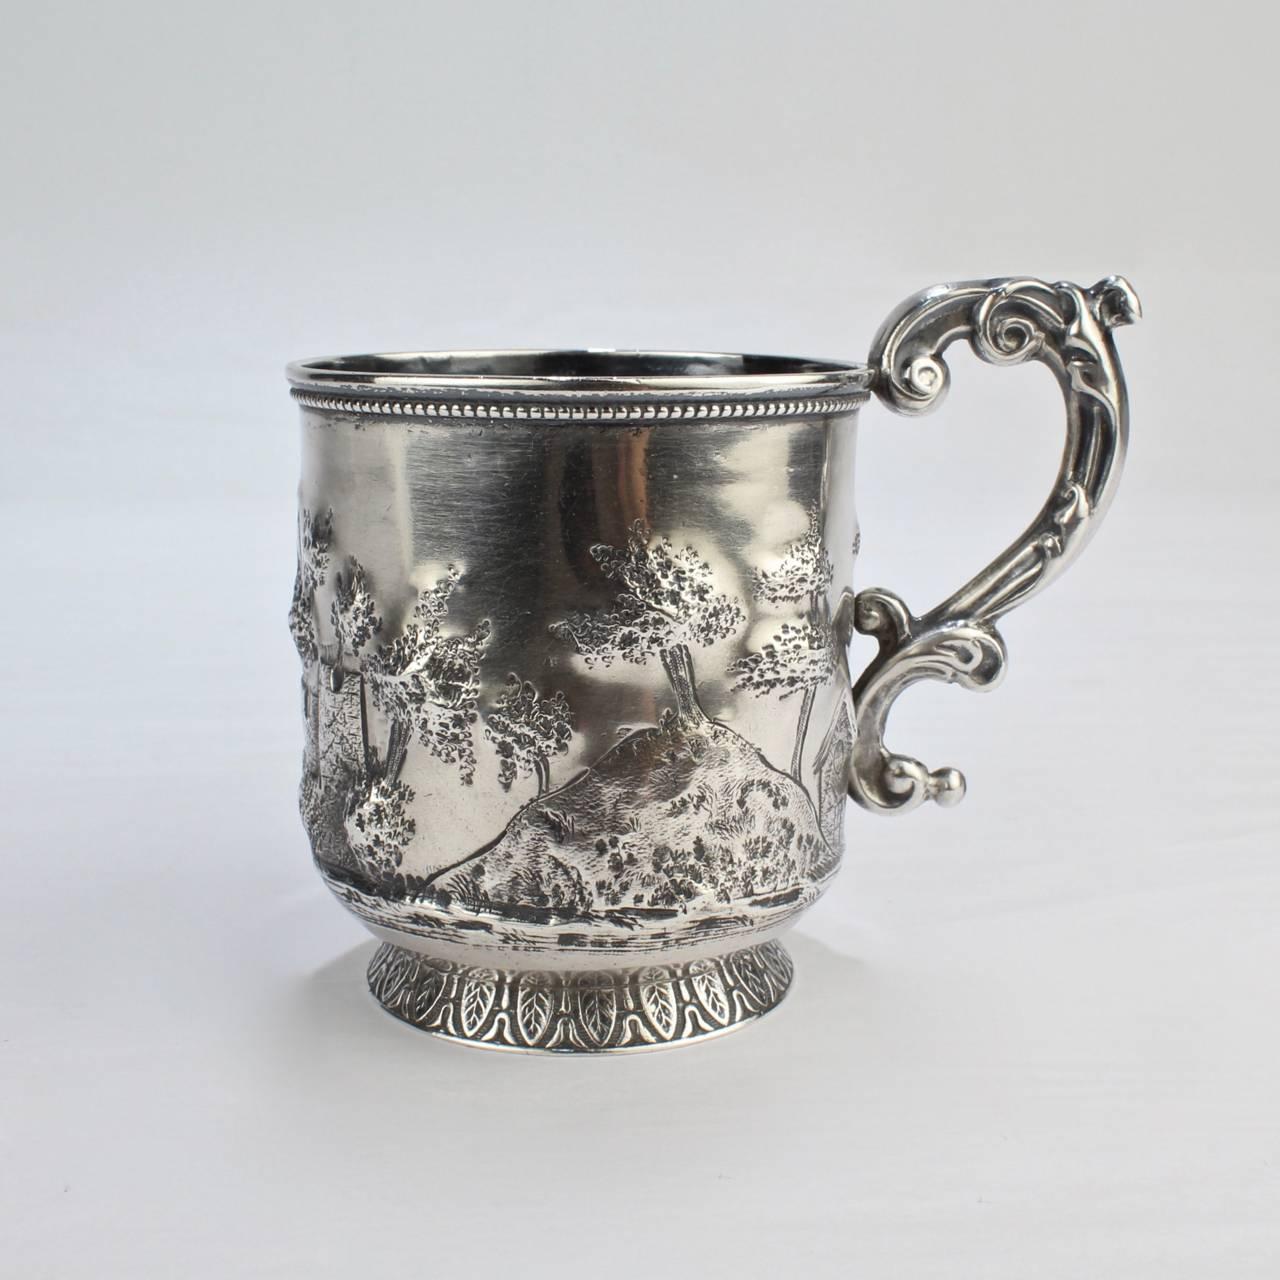 An truly special mid-19th century New Orleans coin silver mug made by Adolphe Himmel. The mug depicts a landscape and architectural scene with a hills, houses, the ruins of a castle or fort, trees, and abundant plant life.

The mug was retailed by